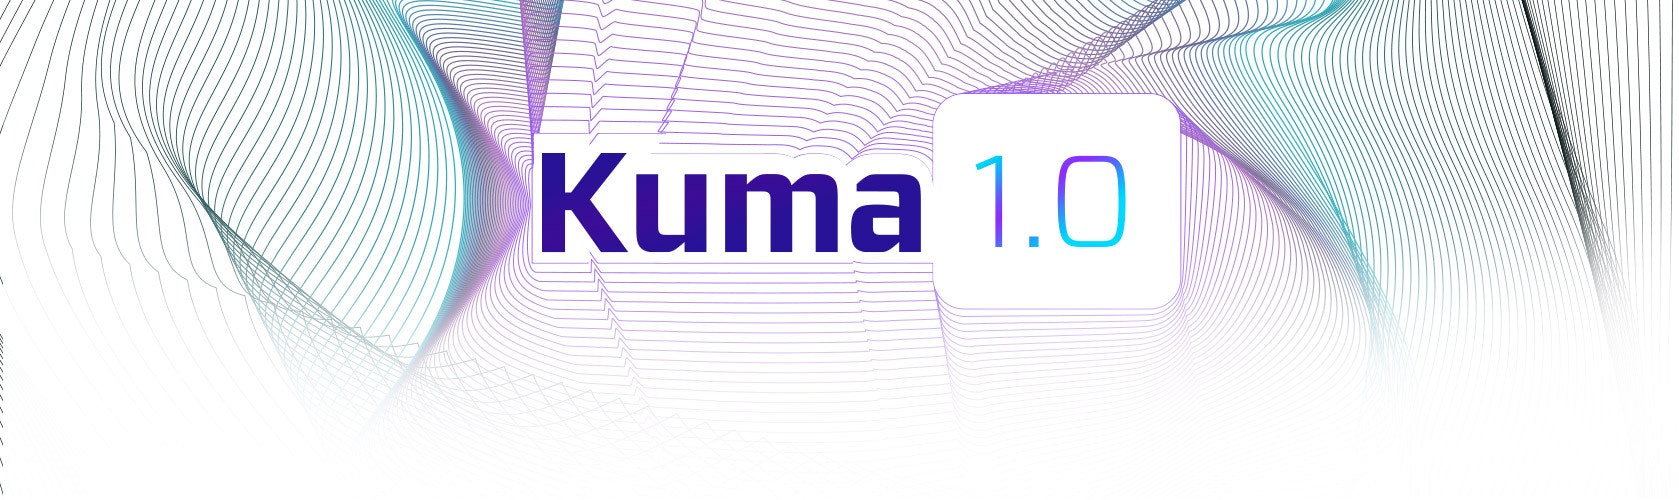 Kuma 1.0 GA Released With 70+ New Features & Improvements